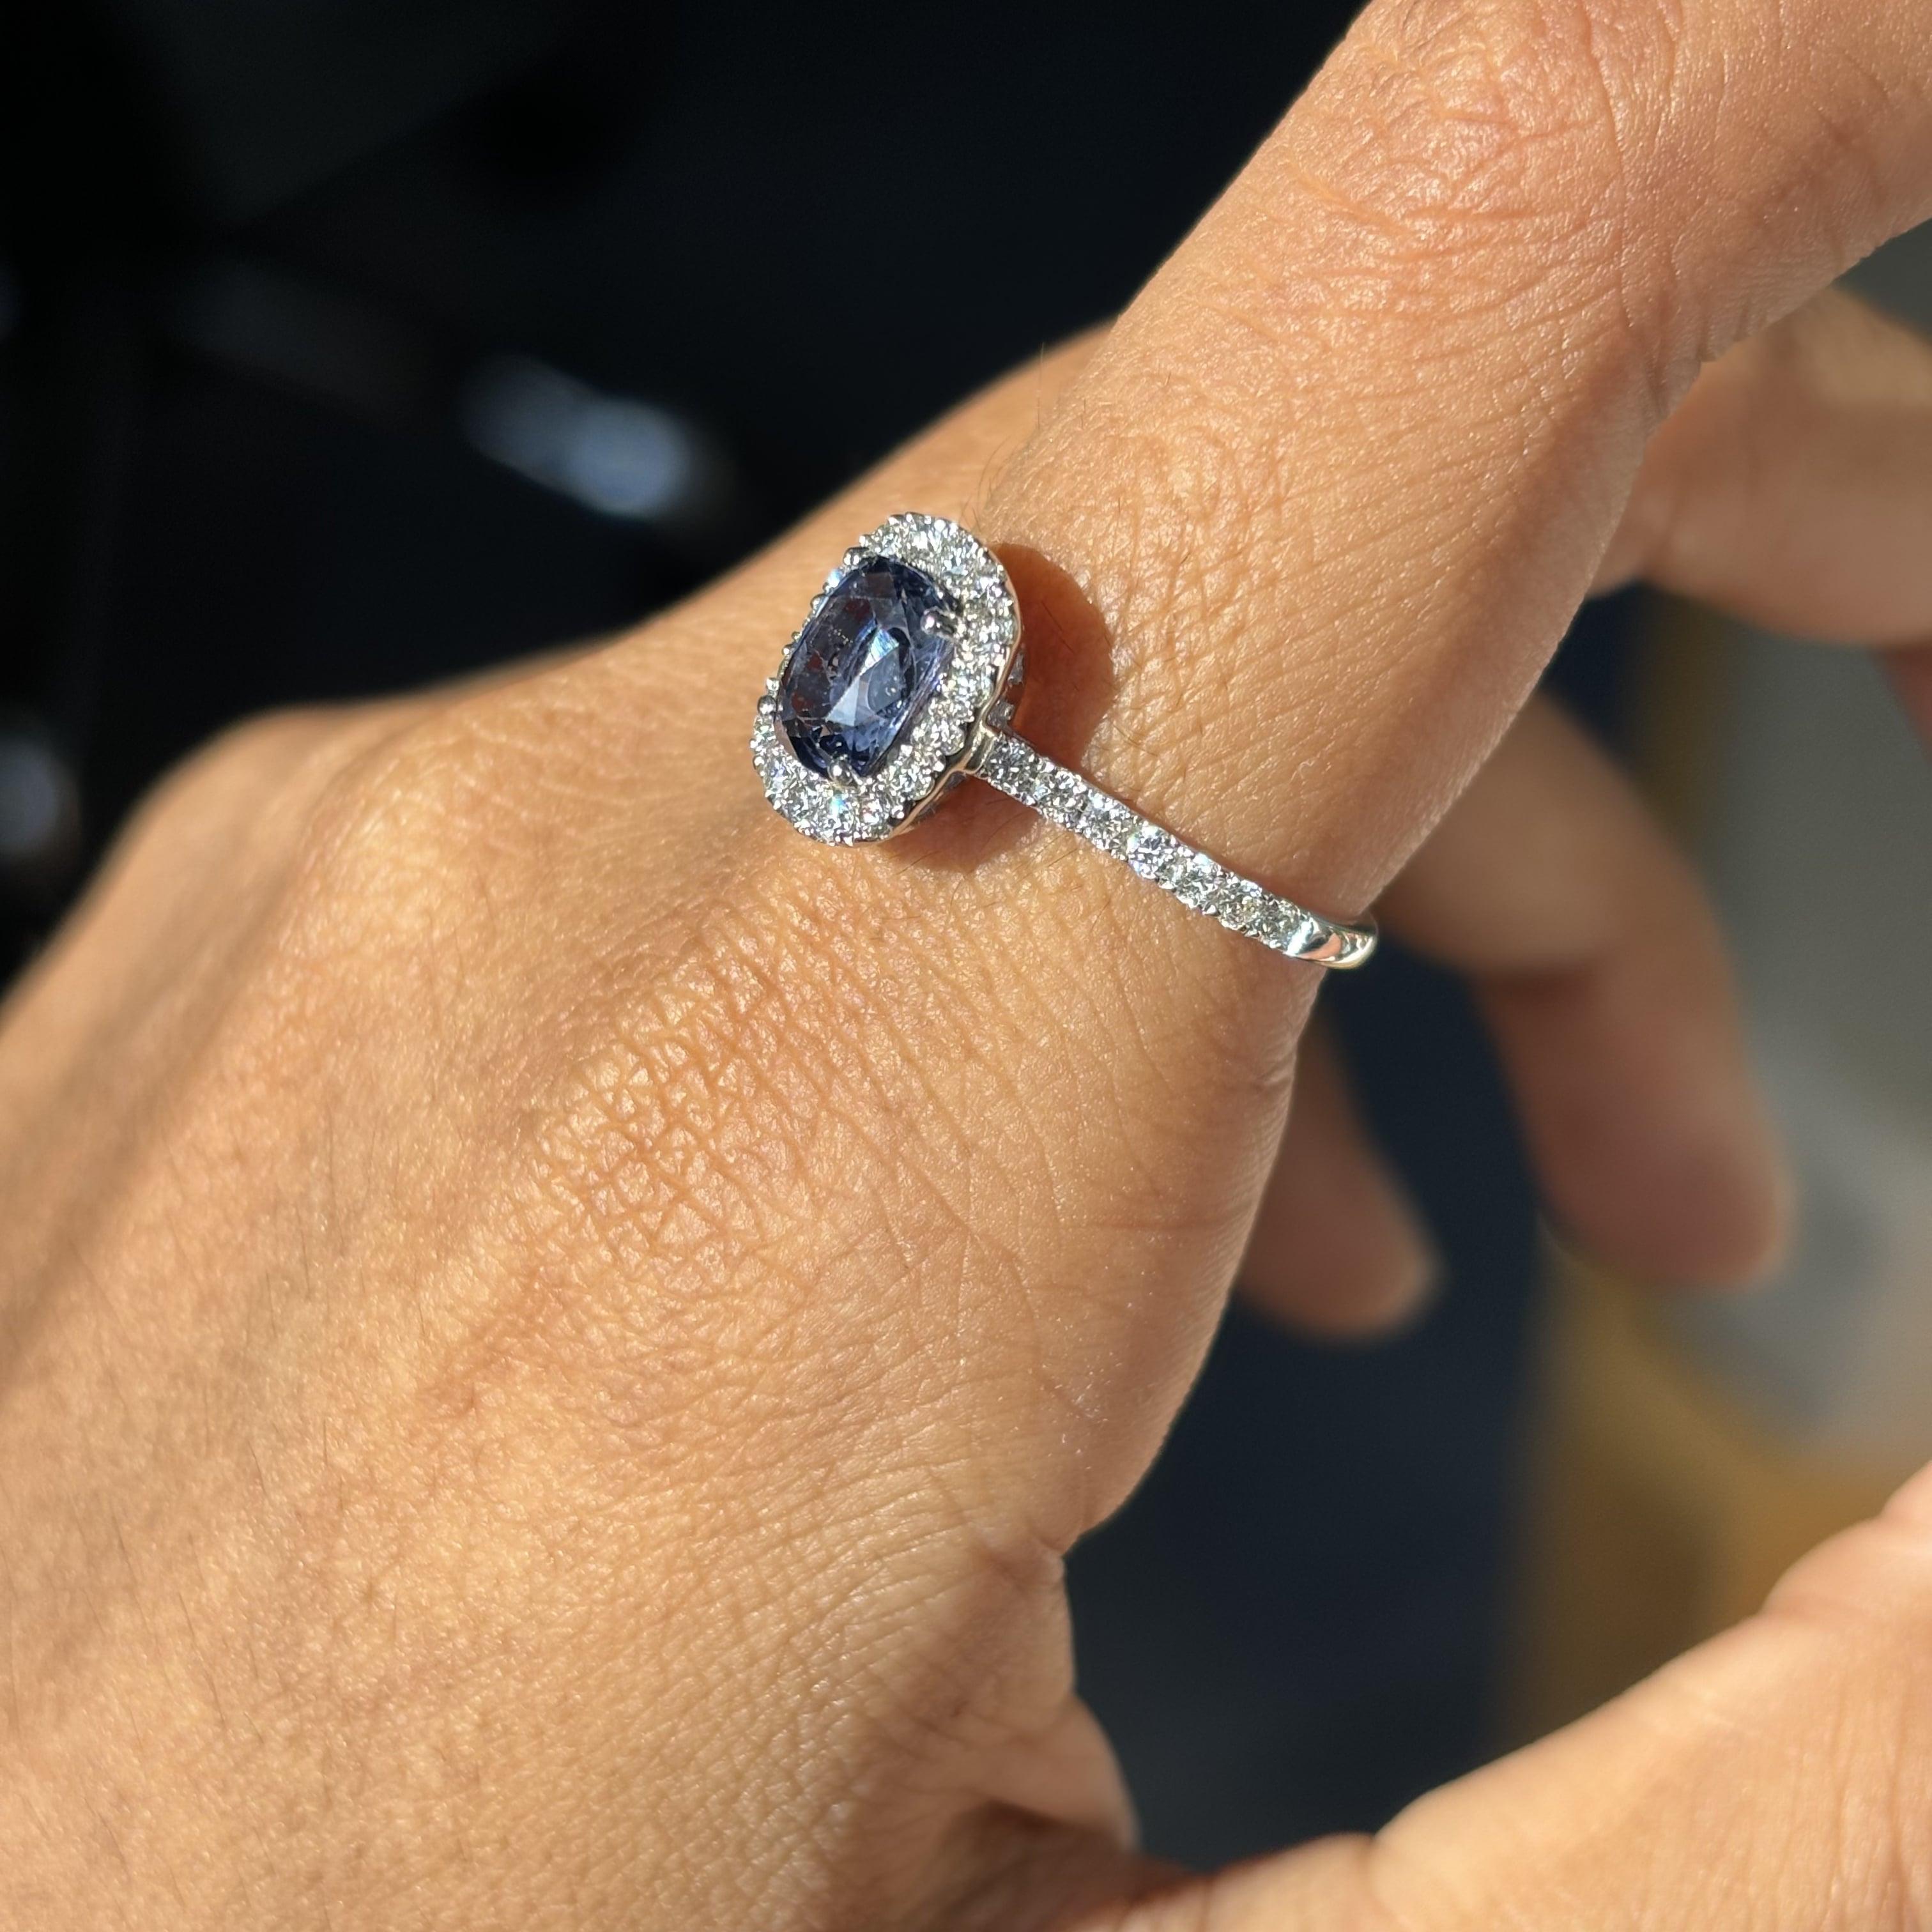 1.21 Carat Ceylon Blue Sapphire Ring with Halo Diamonds in 14K White Gold For Sale 1